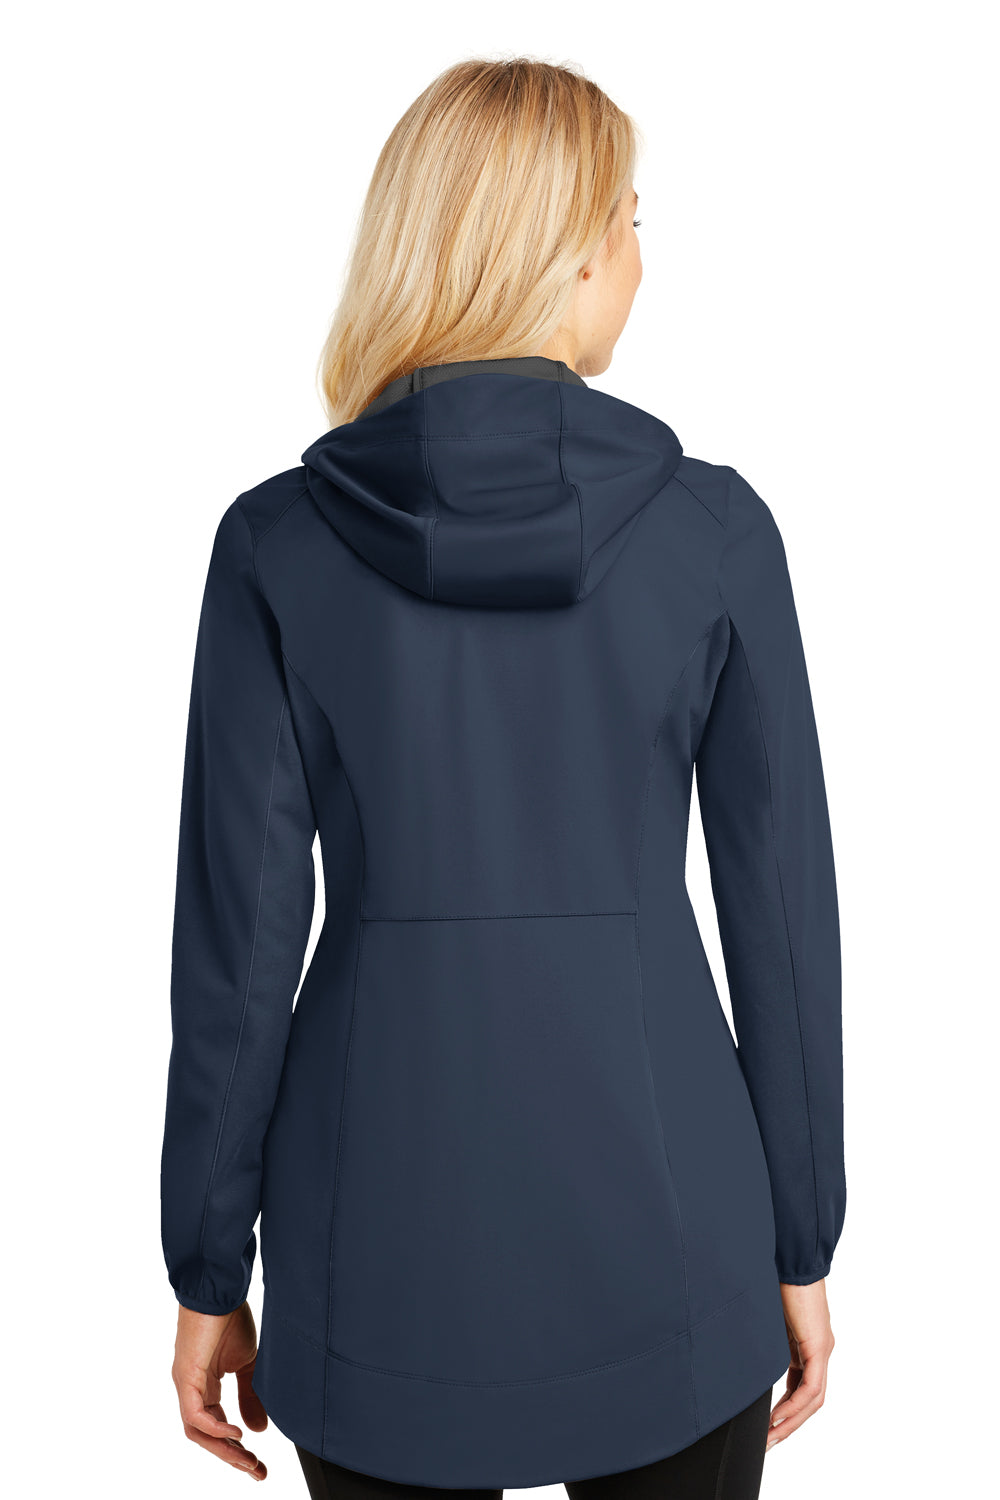 Port Authority L719 Womens Active Wind & Water Resistant Full Zip Hooded Jacket Navy Blue Back